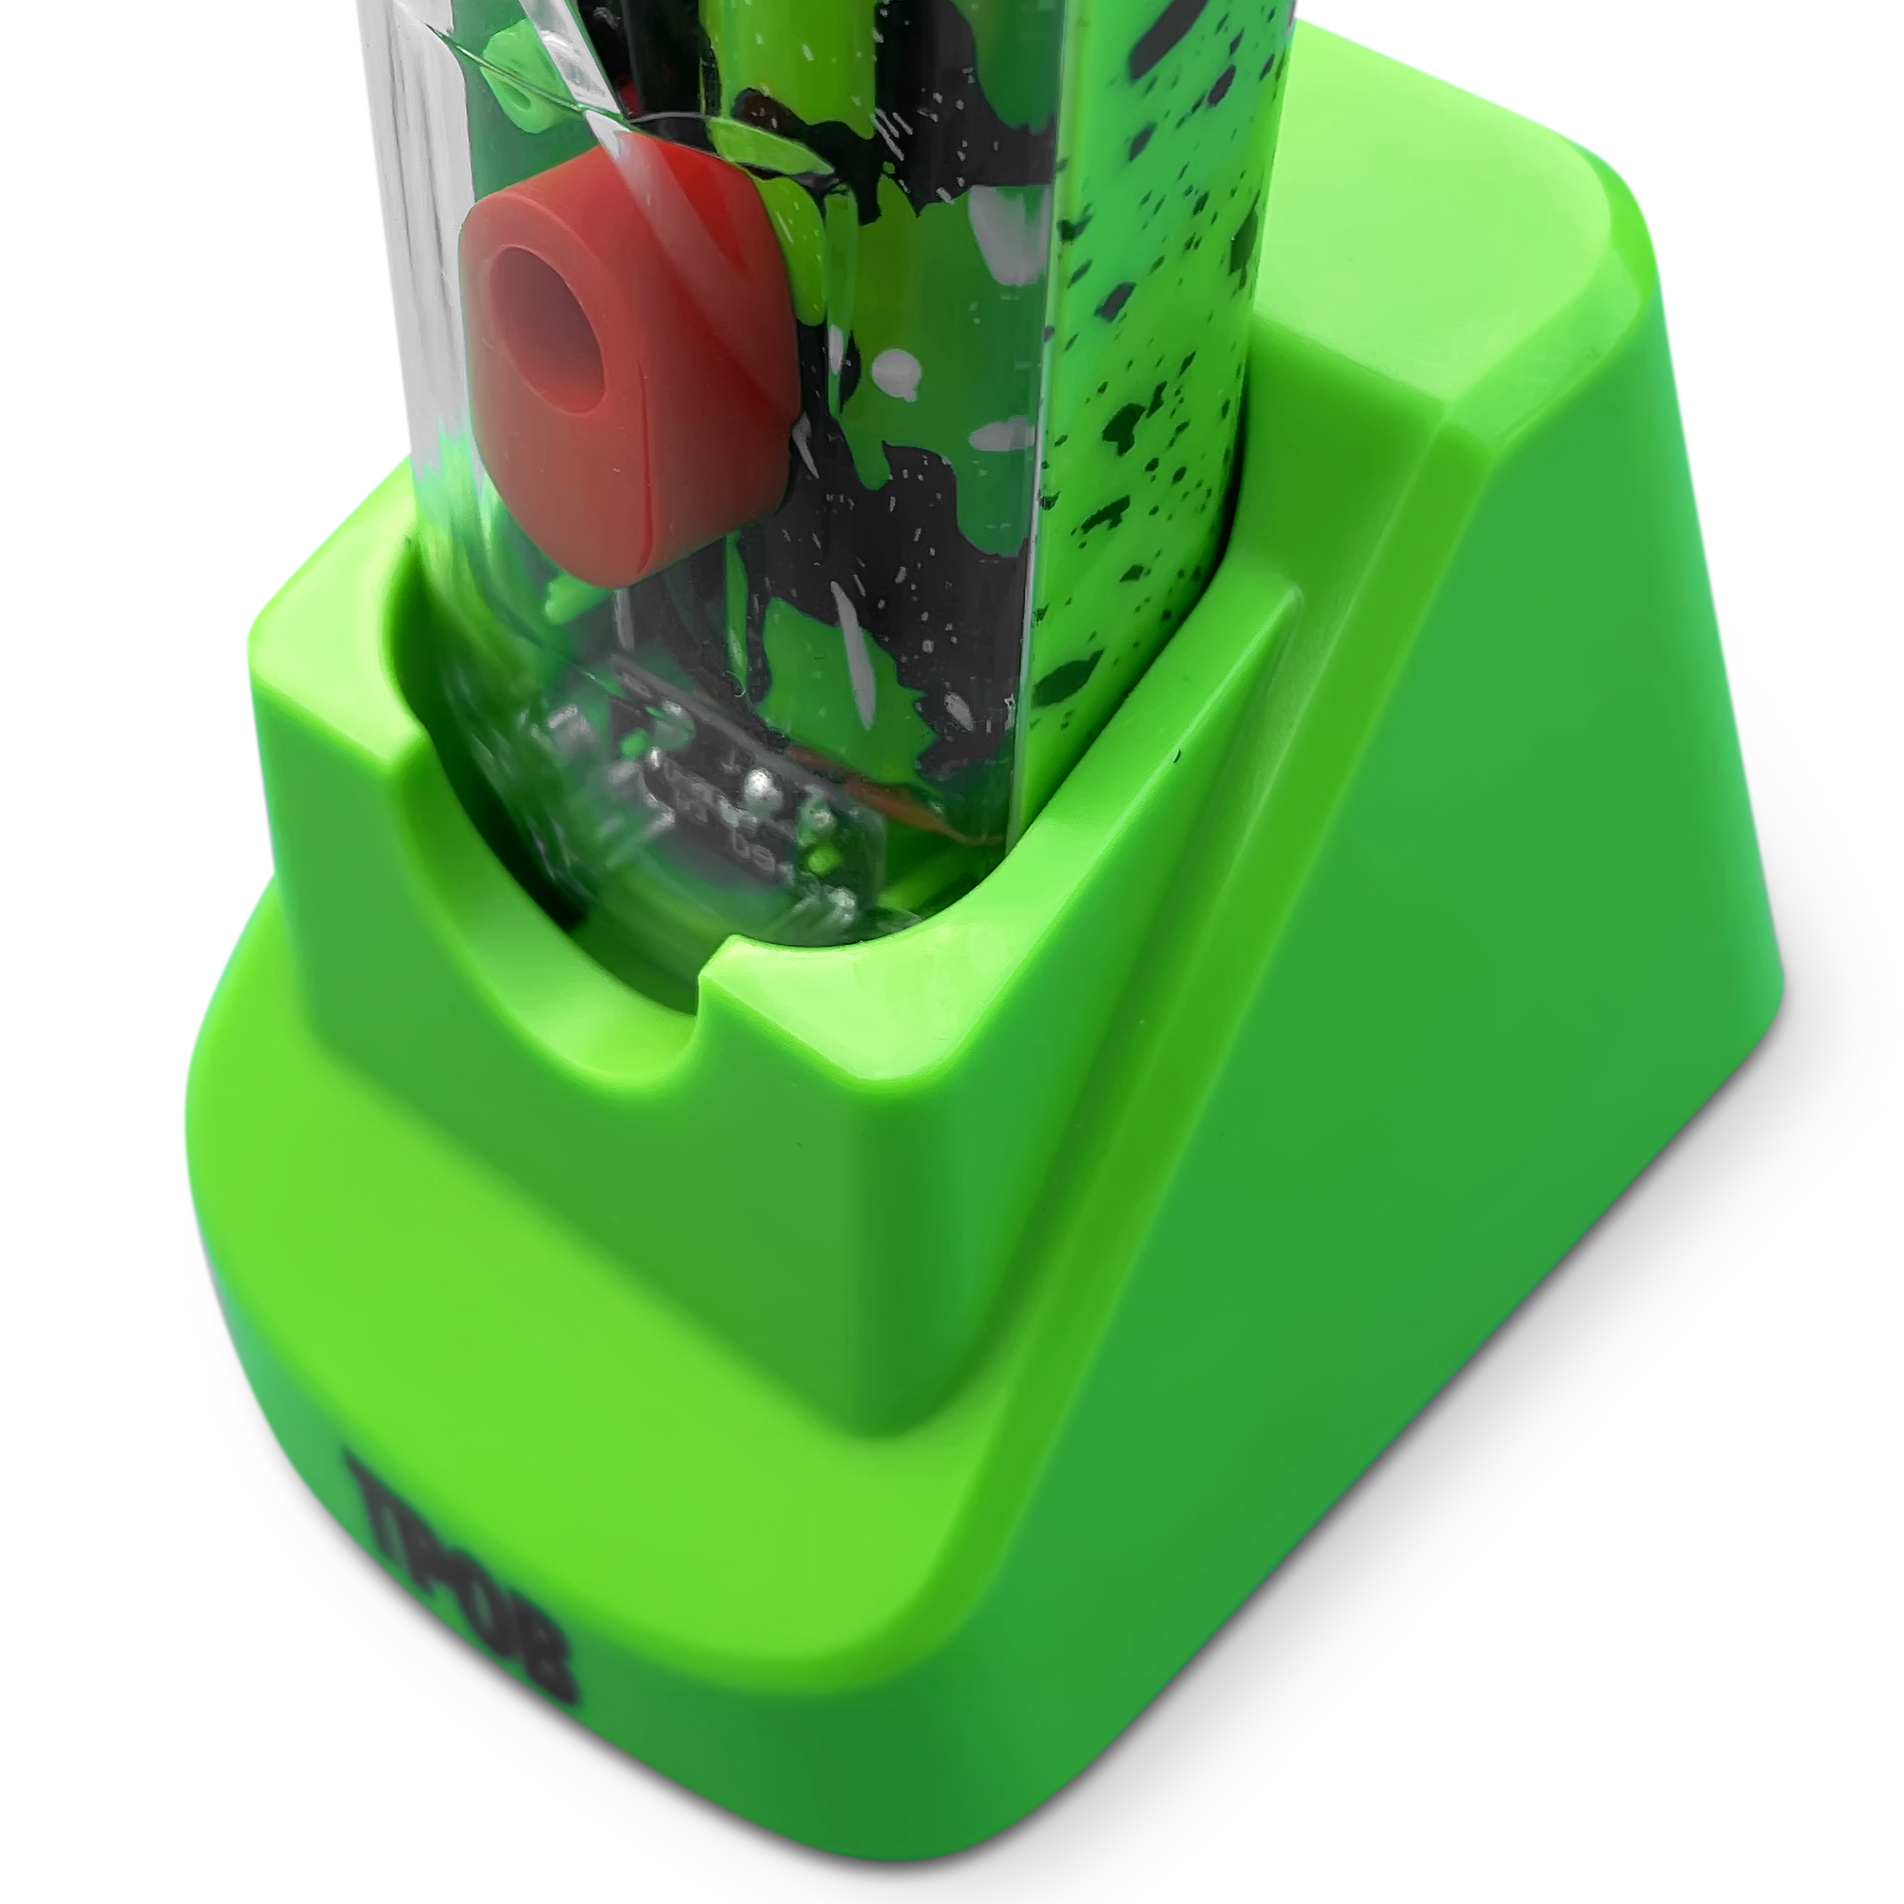 Slime/Candy/Reaper Charging Stand